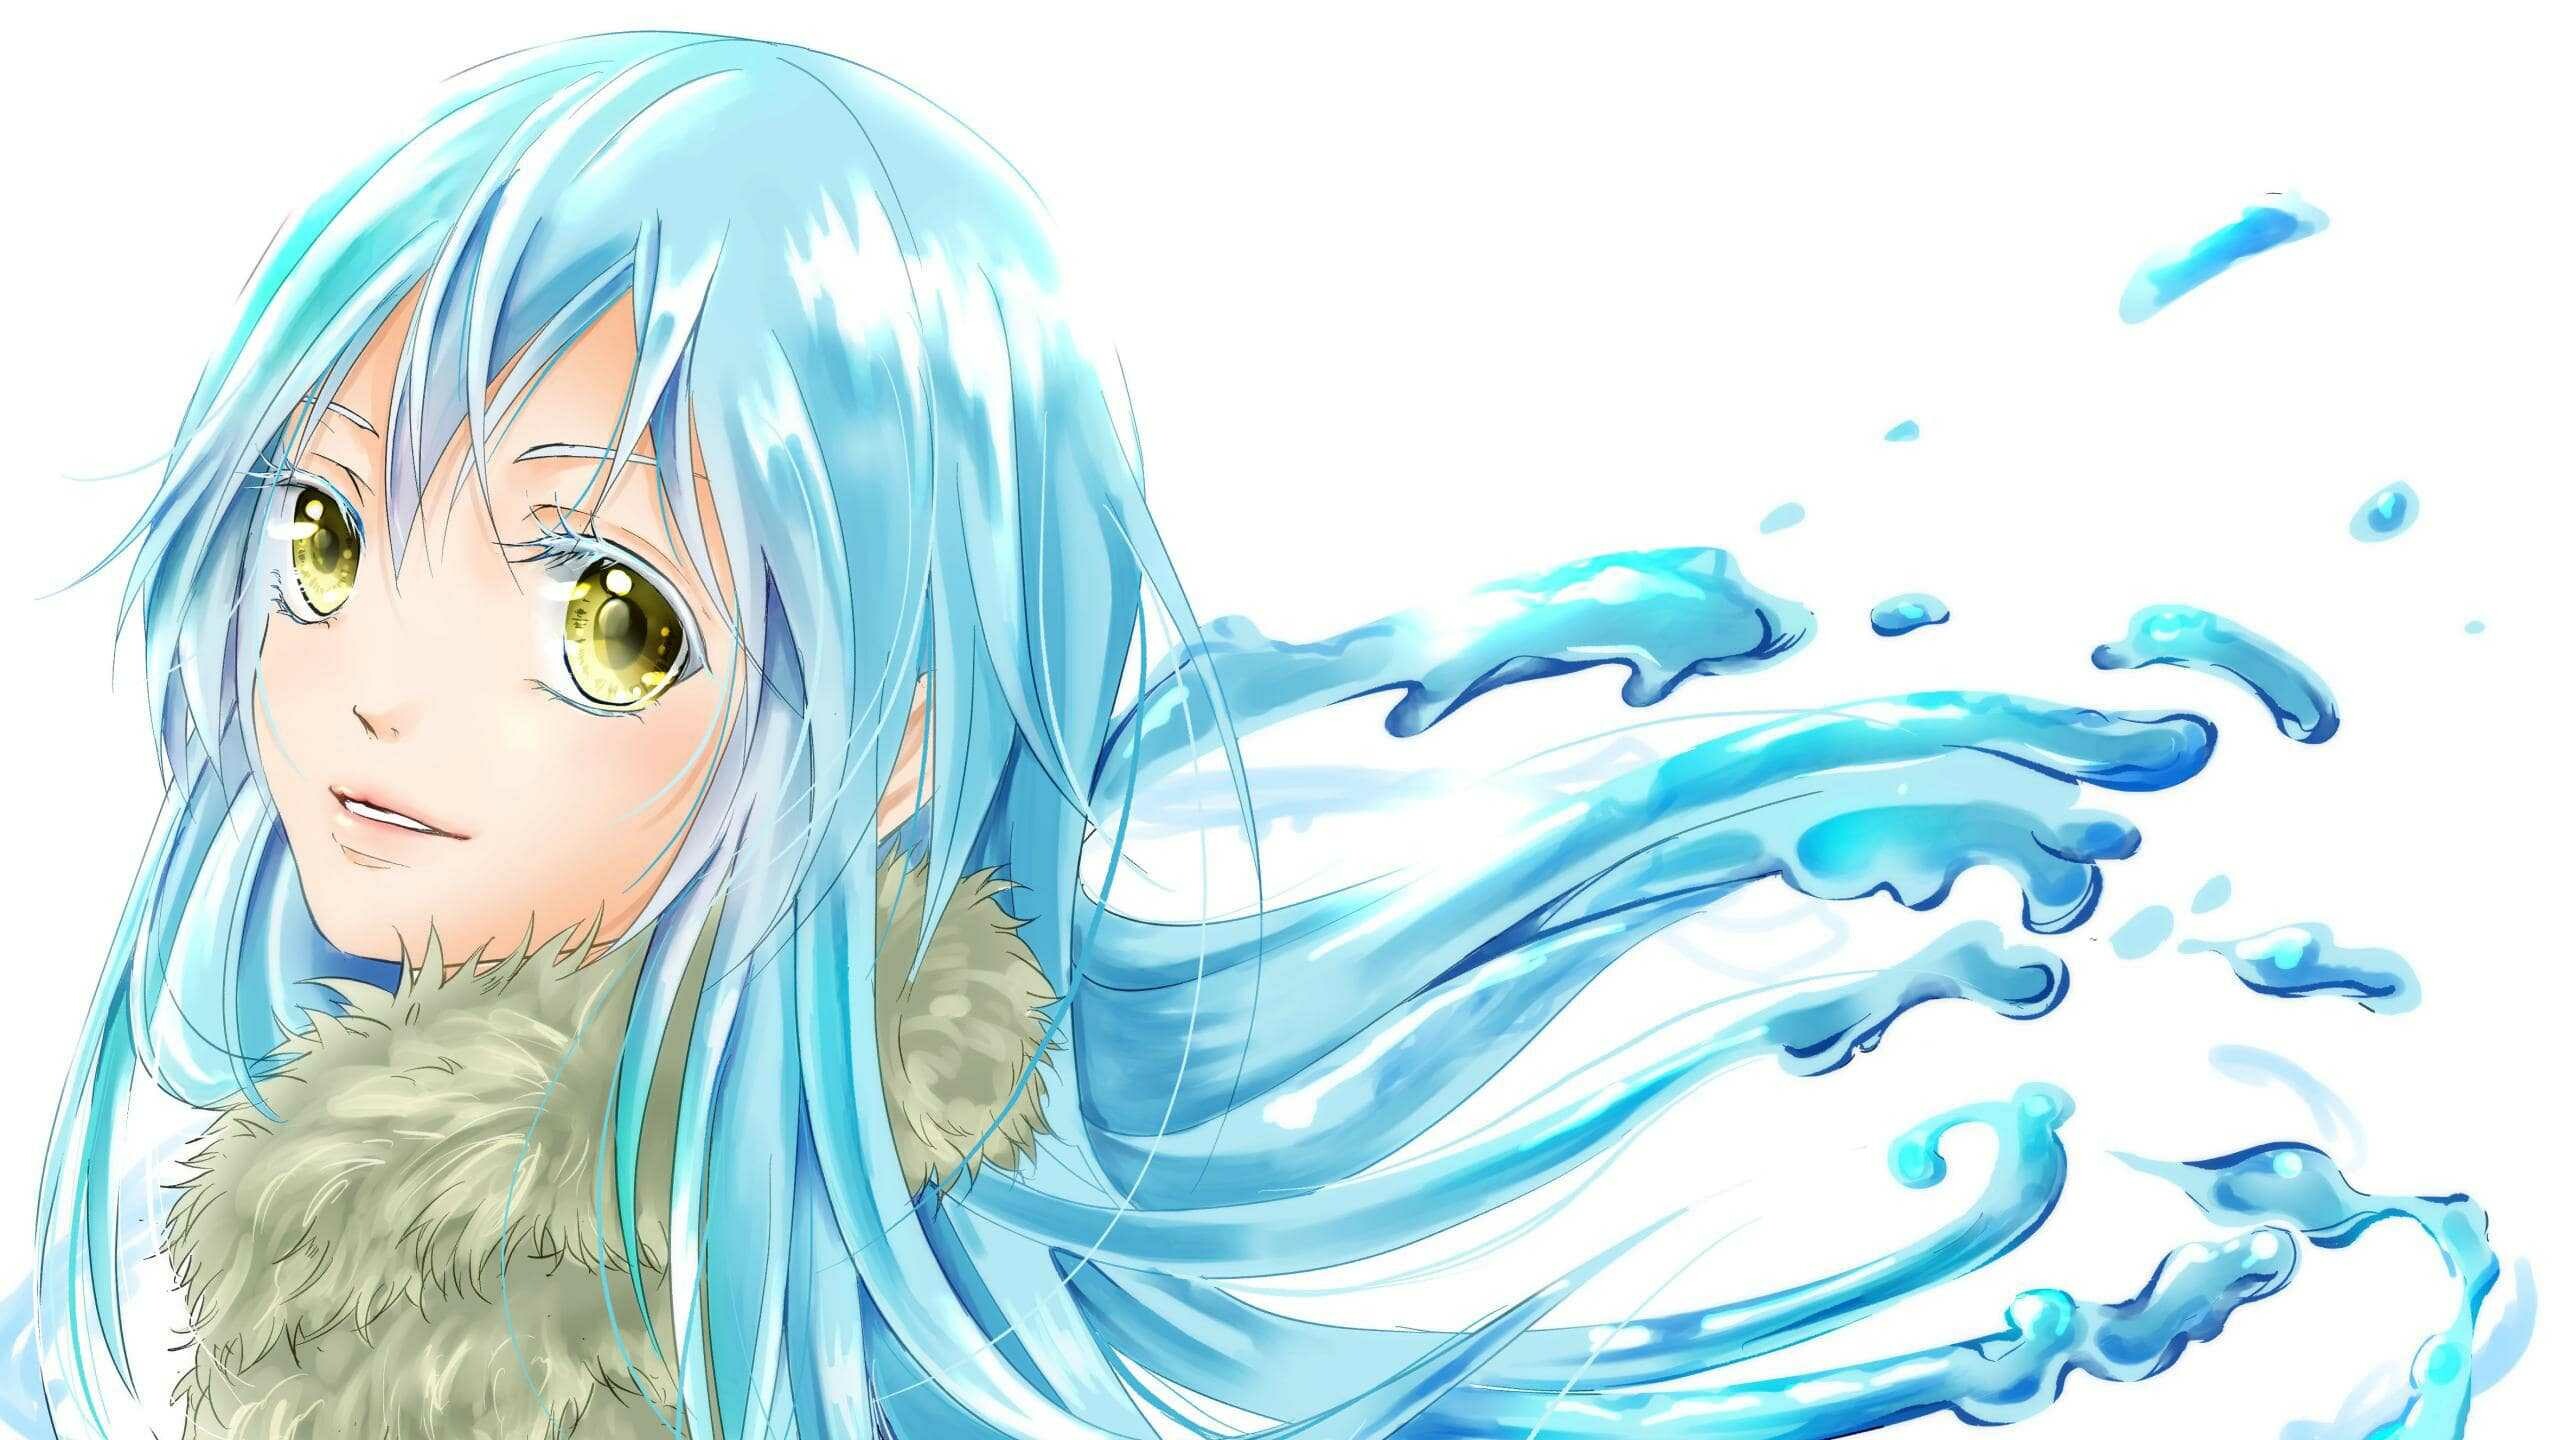 That Time I Got Reincarnated as a Slime: Founder, Chancellor, and King of the monster nation known as the Jura-Tempest Federation. 2560x1440 HD Wallpaper.